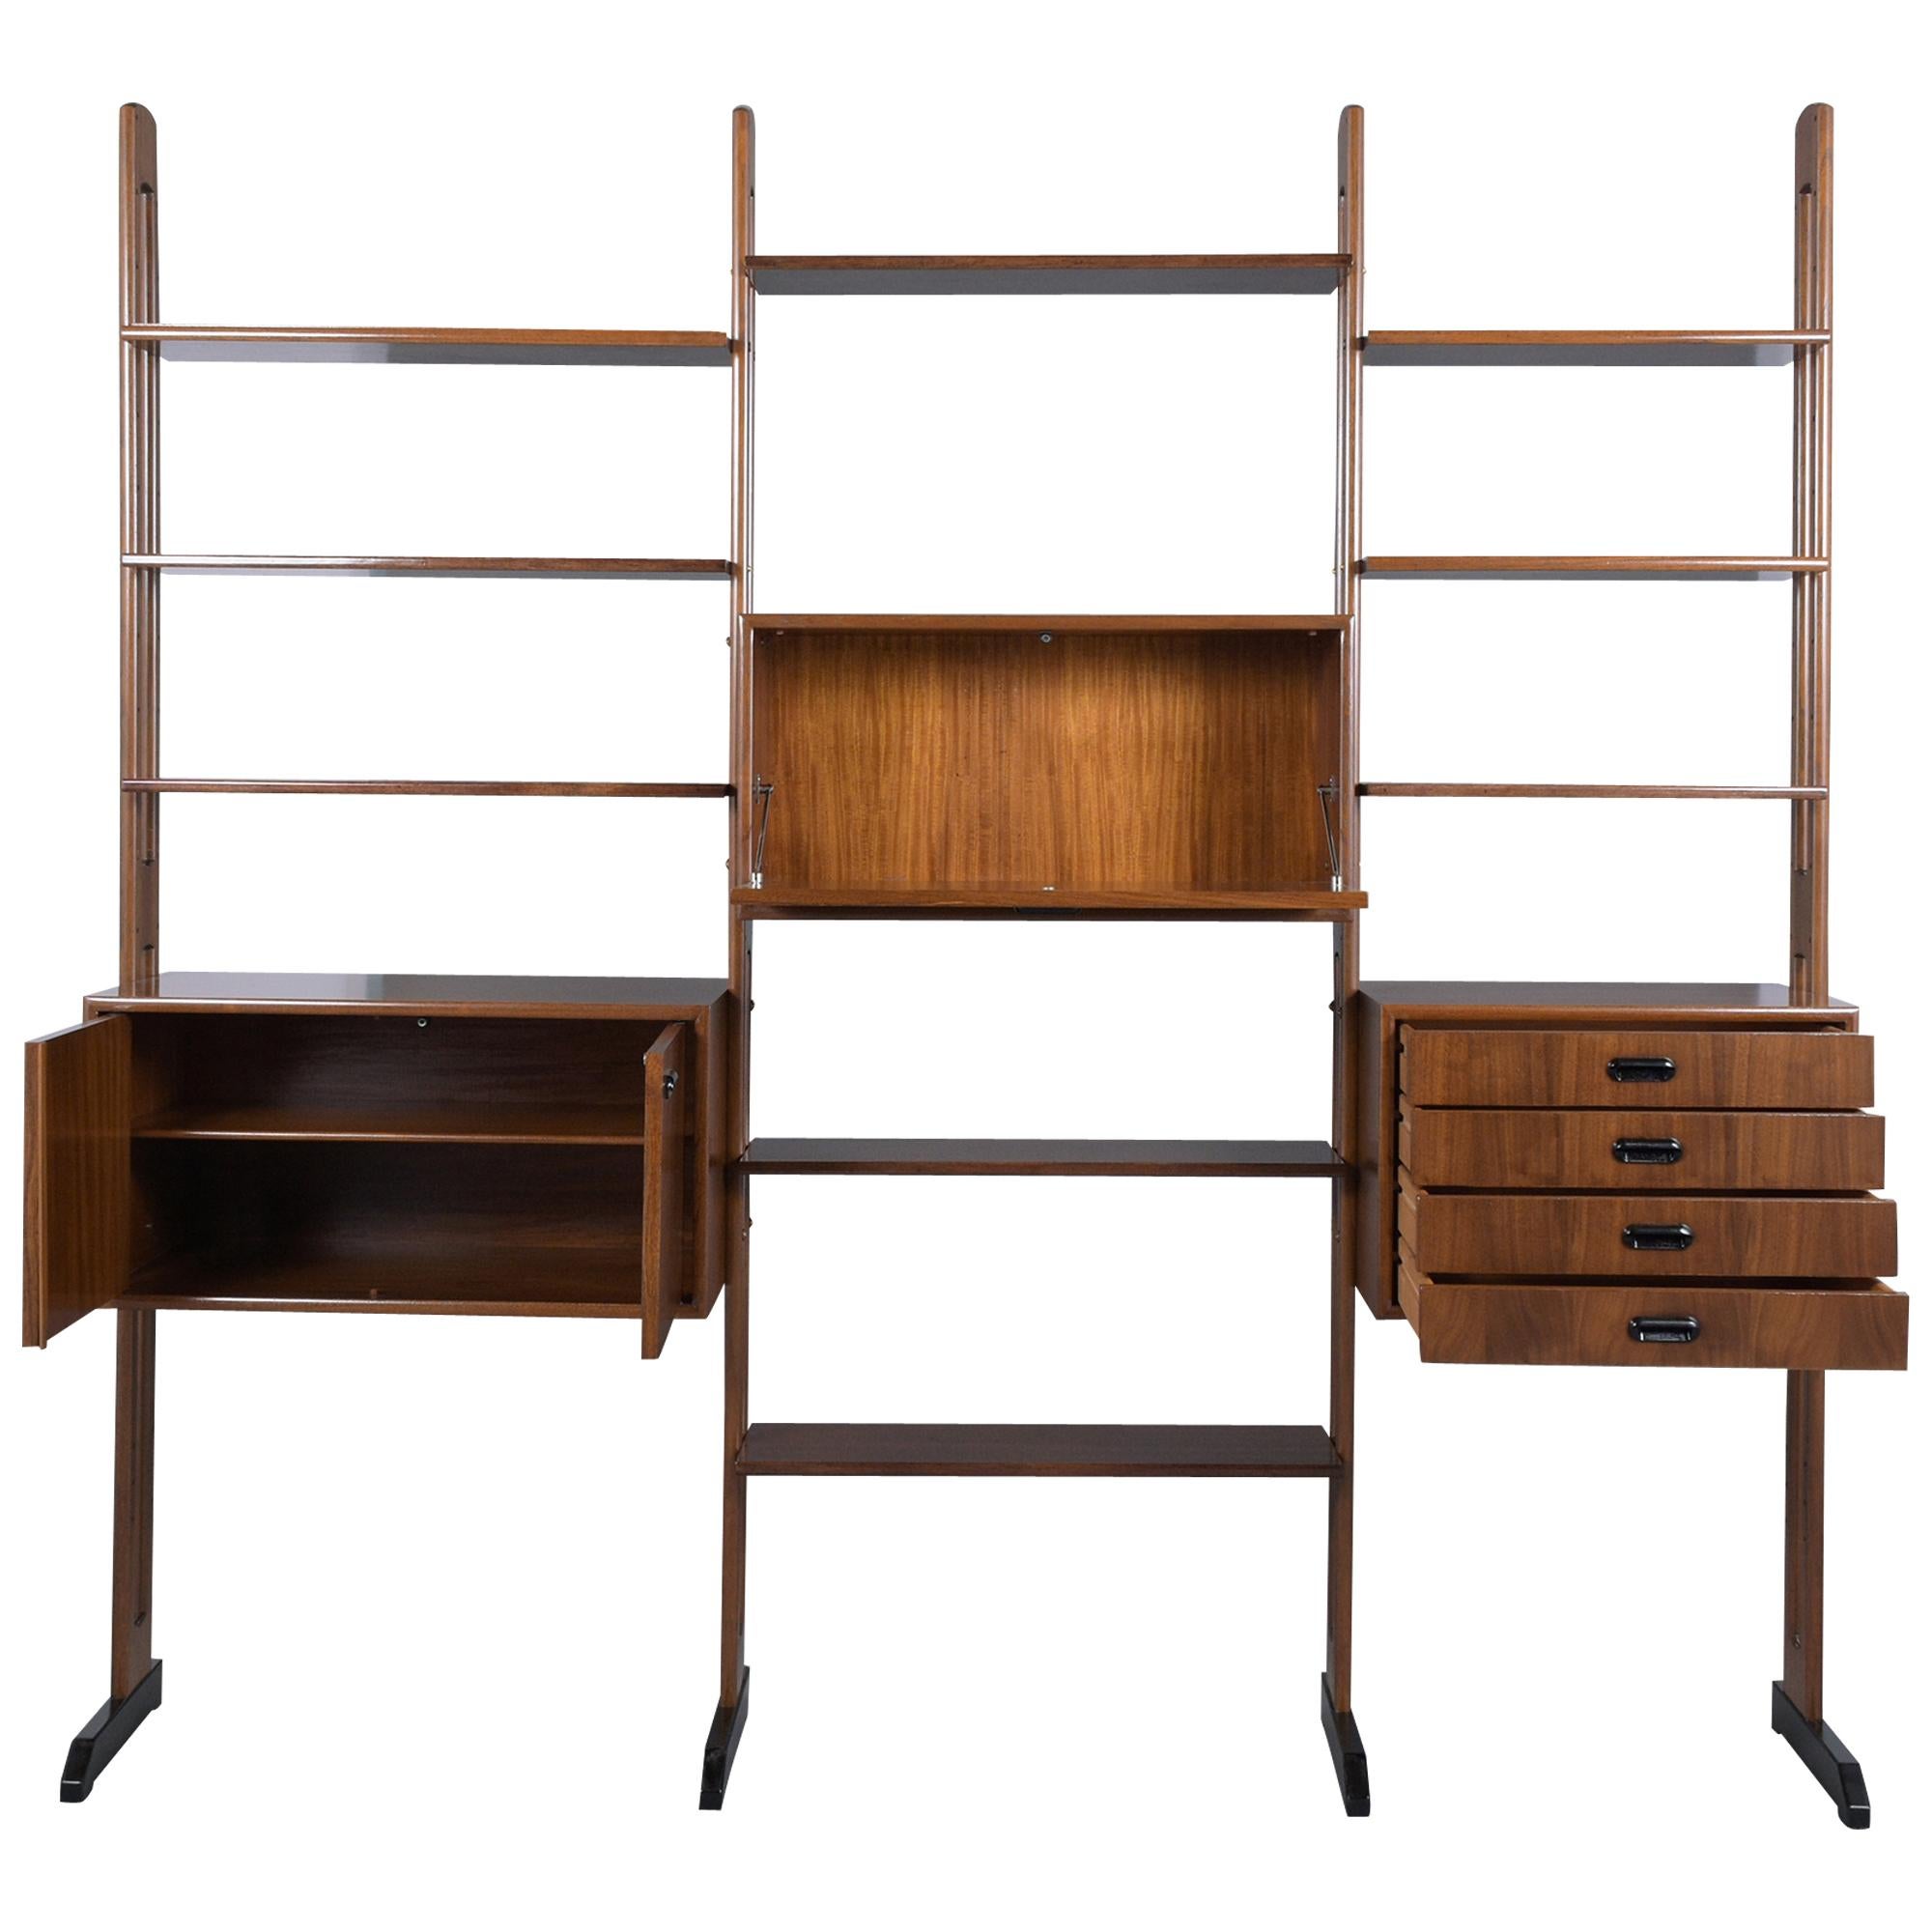 An extraordinary Mid-Century Danish modern bookcase hand-crafted out of walnut wood, fully restored and newly refinished in a dark walnut color with an ebonized finish and a lacquer finish. This beautiful bookcase features three cabinets, one of